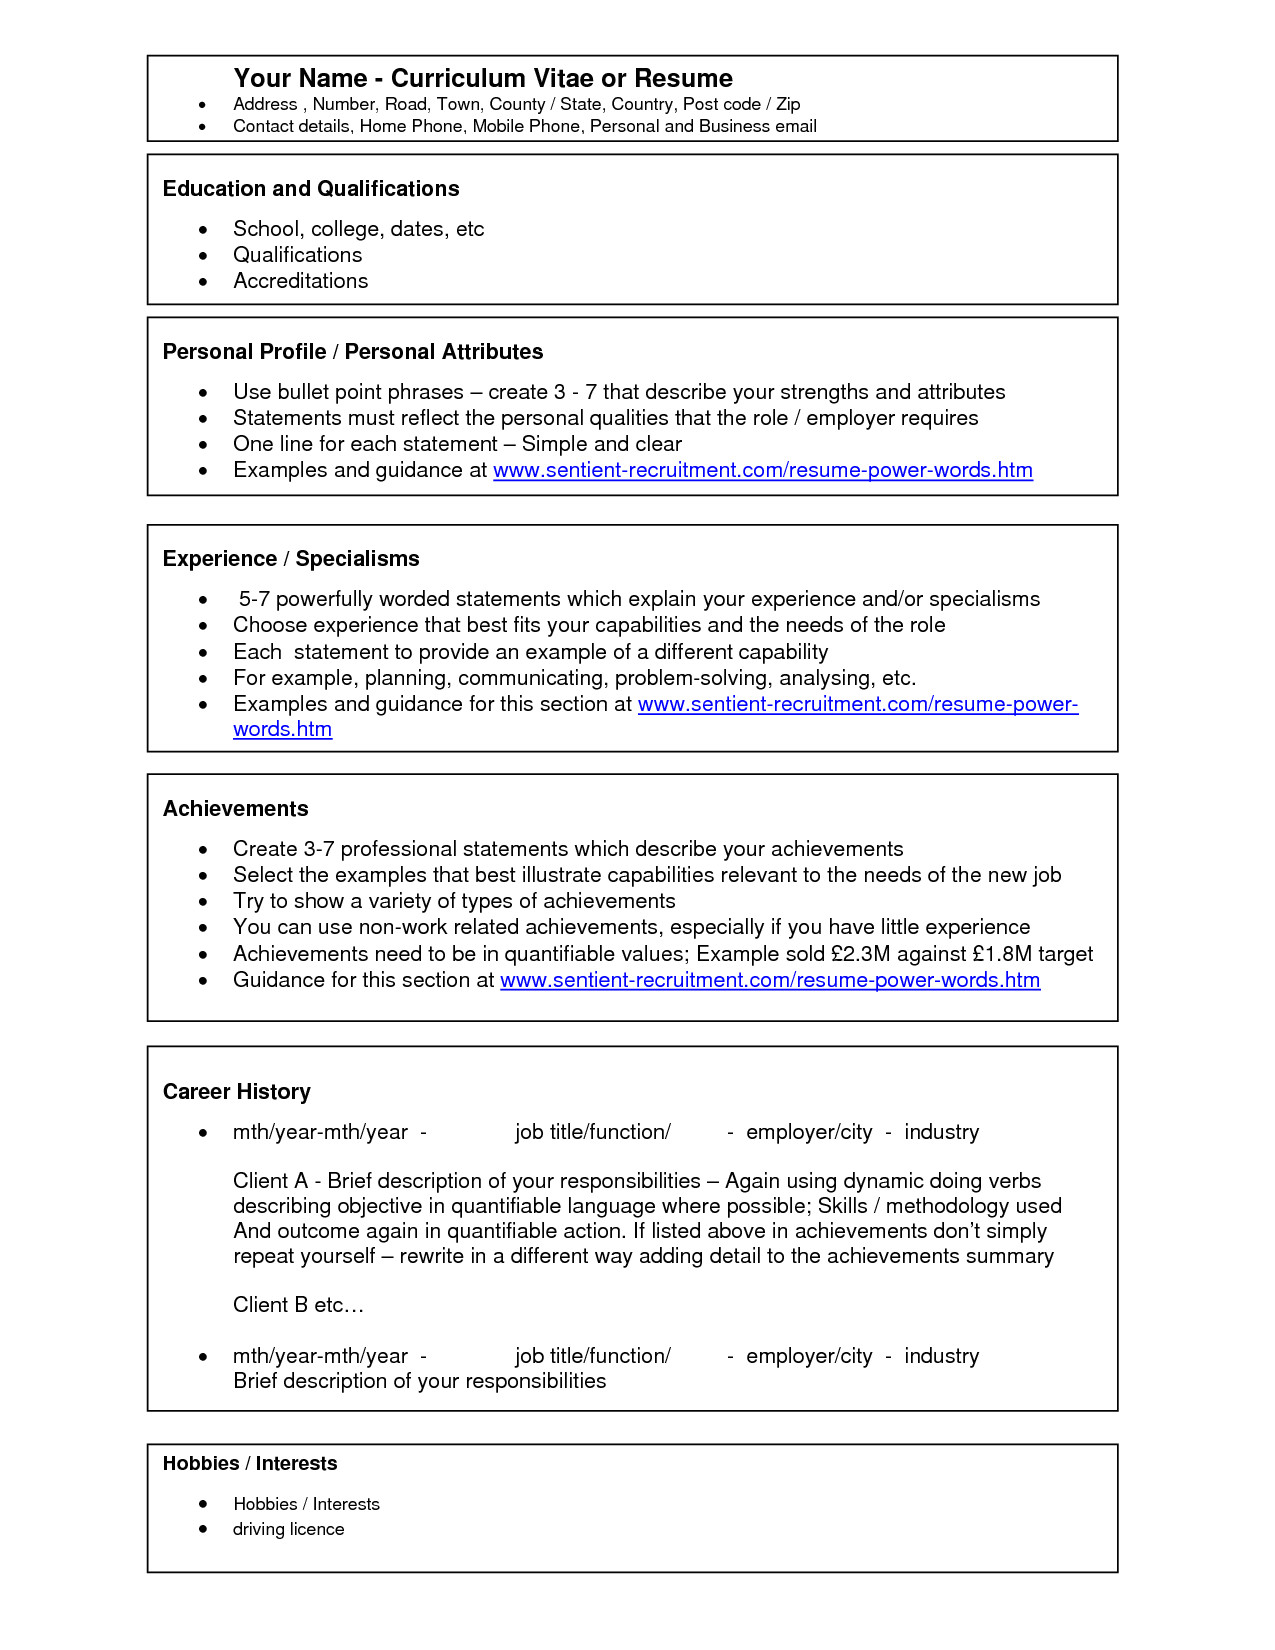 how to use resume template in word 2010 free printable templates download microsoft template